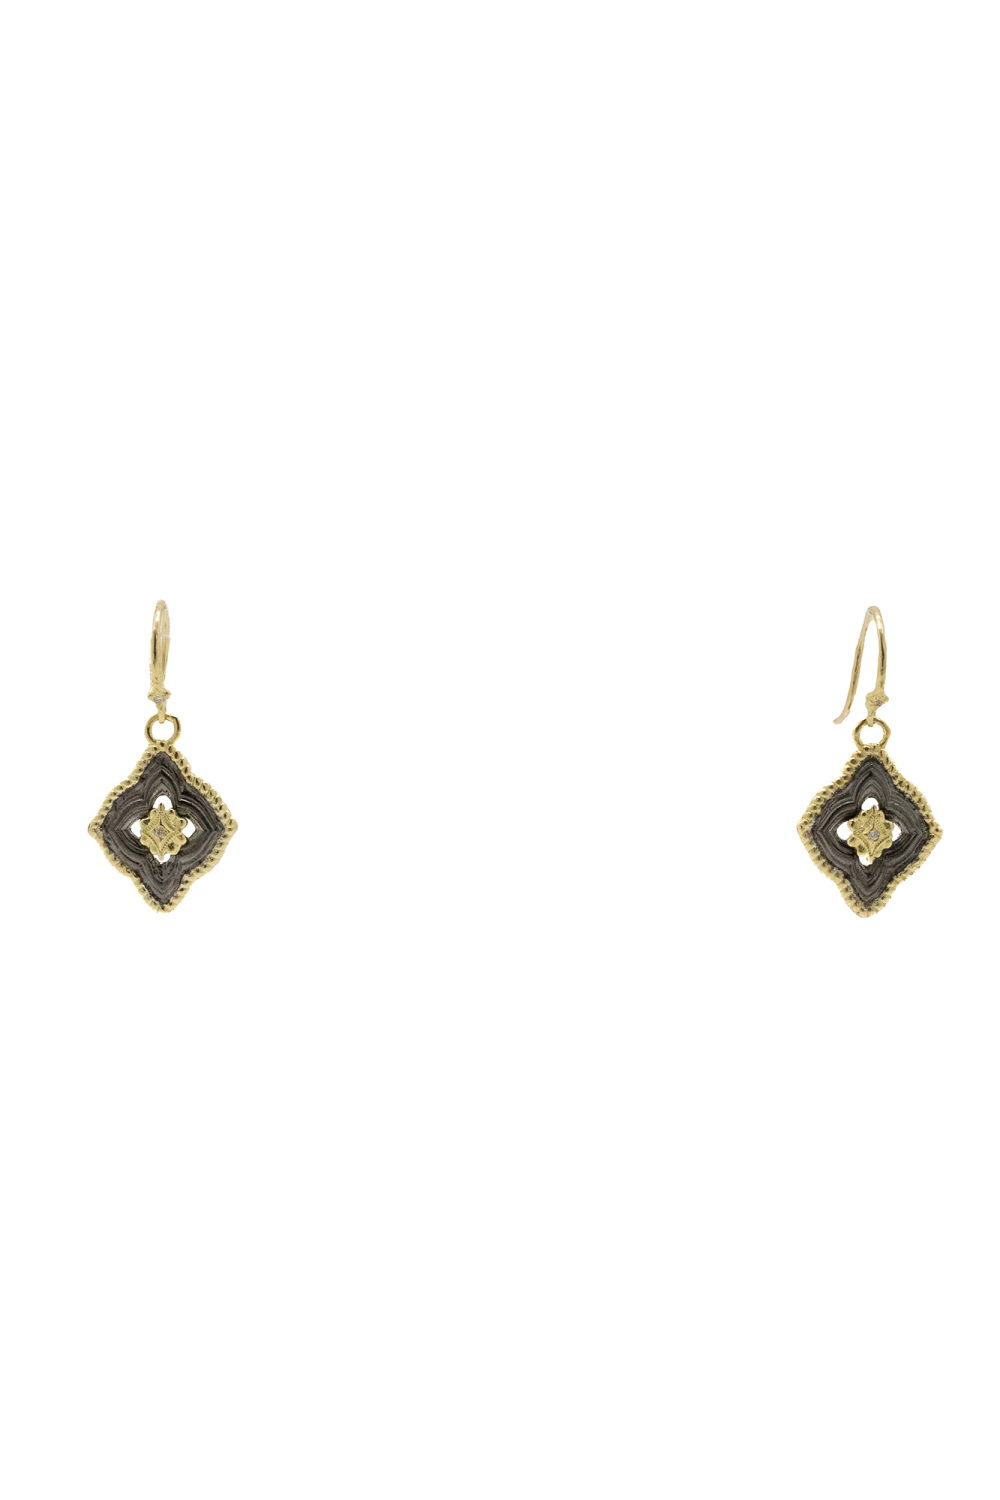 These 18k Yellow Gold Scroll Earrings from Armenta bring sophistication with their yellow gold and blackened sterling silver combination. The 15mm scroll drop, rope border, and crivelli detail stations create a luxurious look that's sure to make a striking impression. White diamond crivelli hooks add even more refinement.